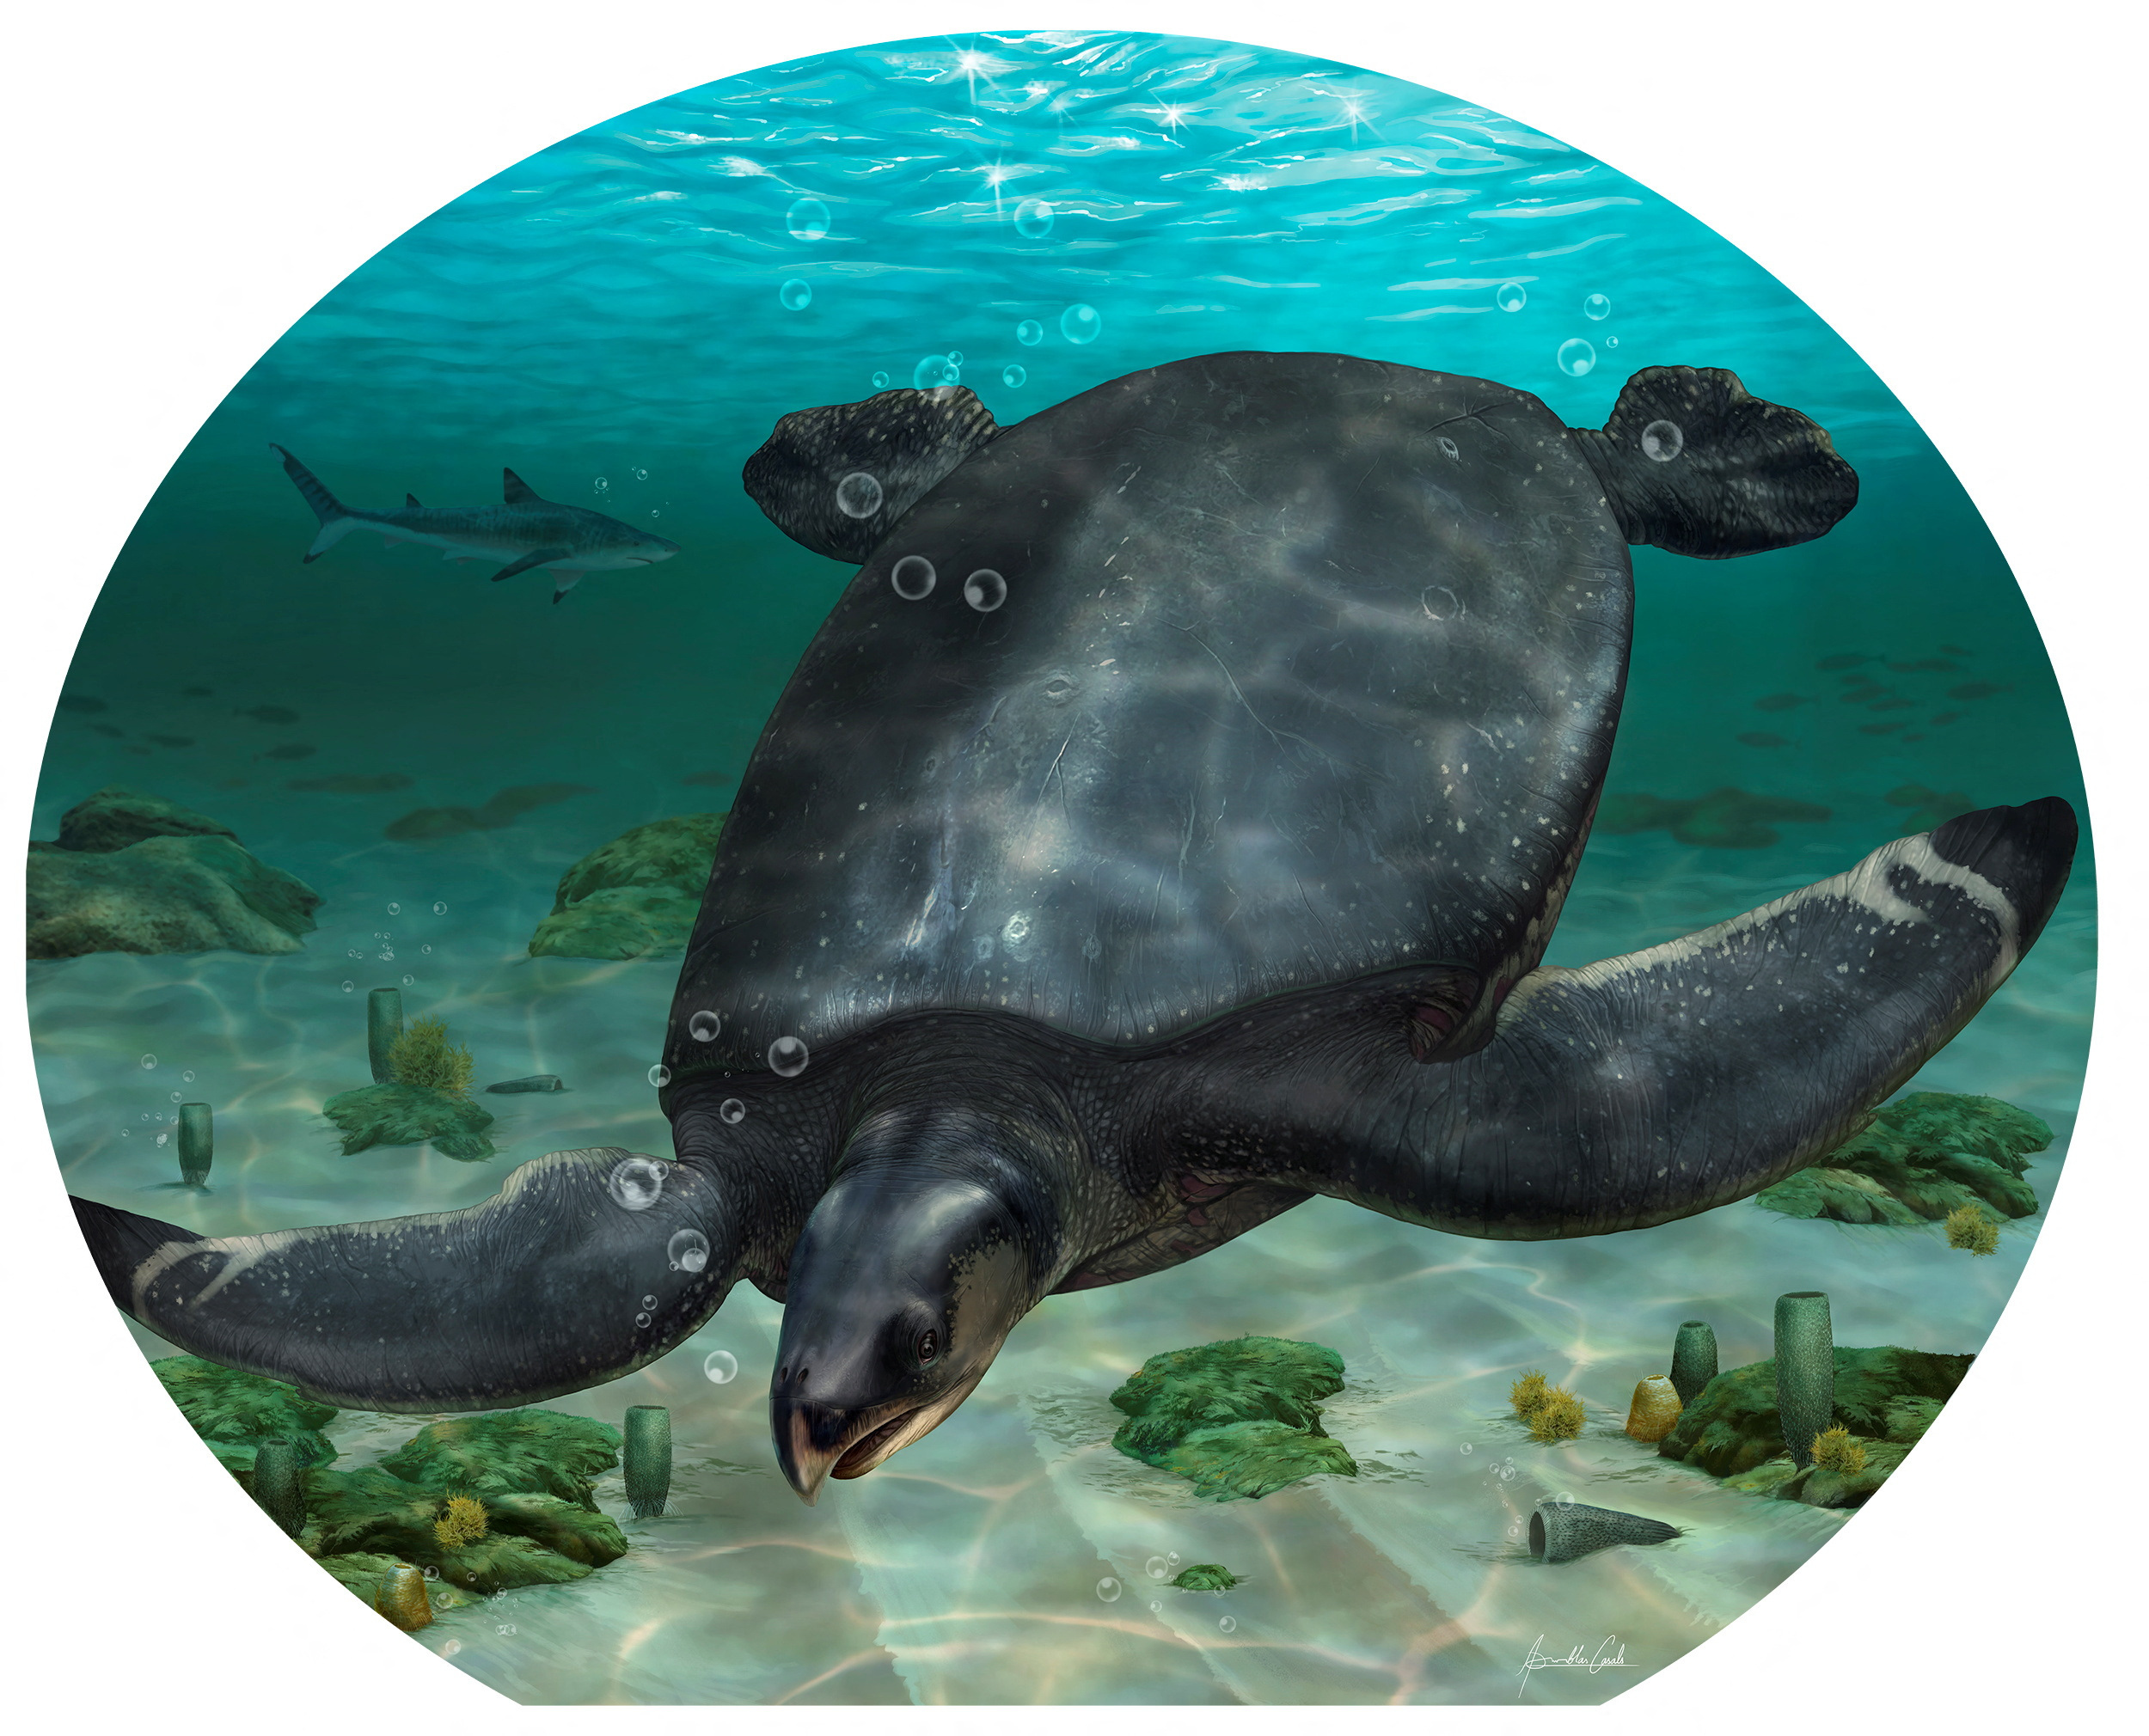 An illustrated reconstruction of the Cretaceous large sea turtle Leviathanochelys aenigmatica